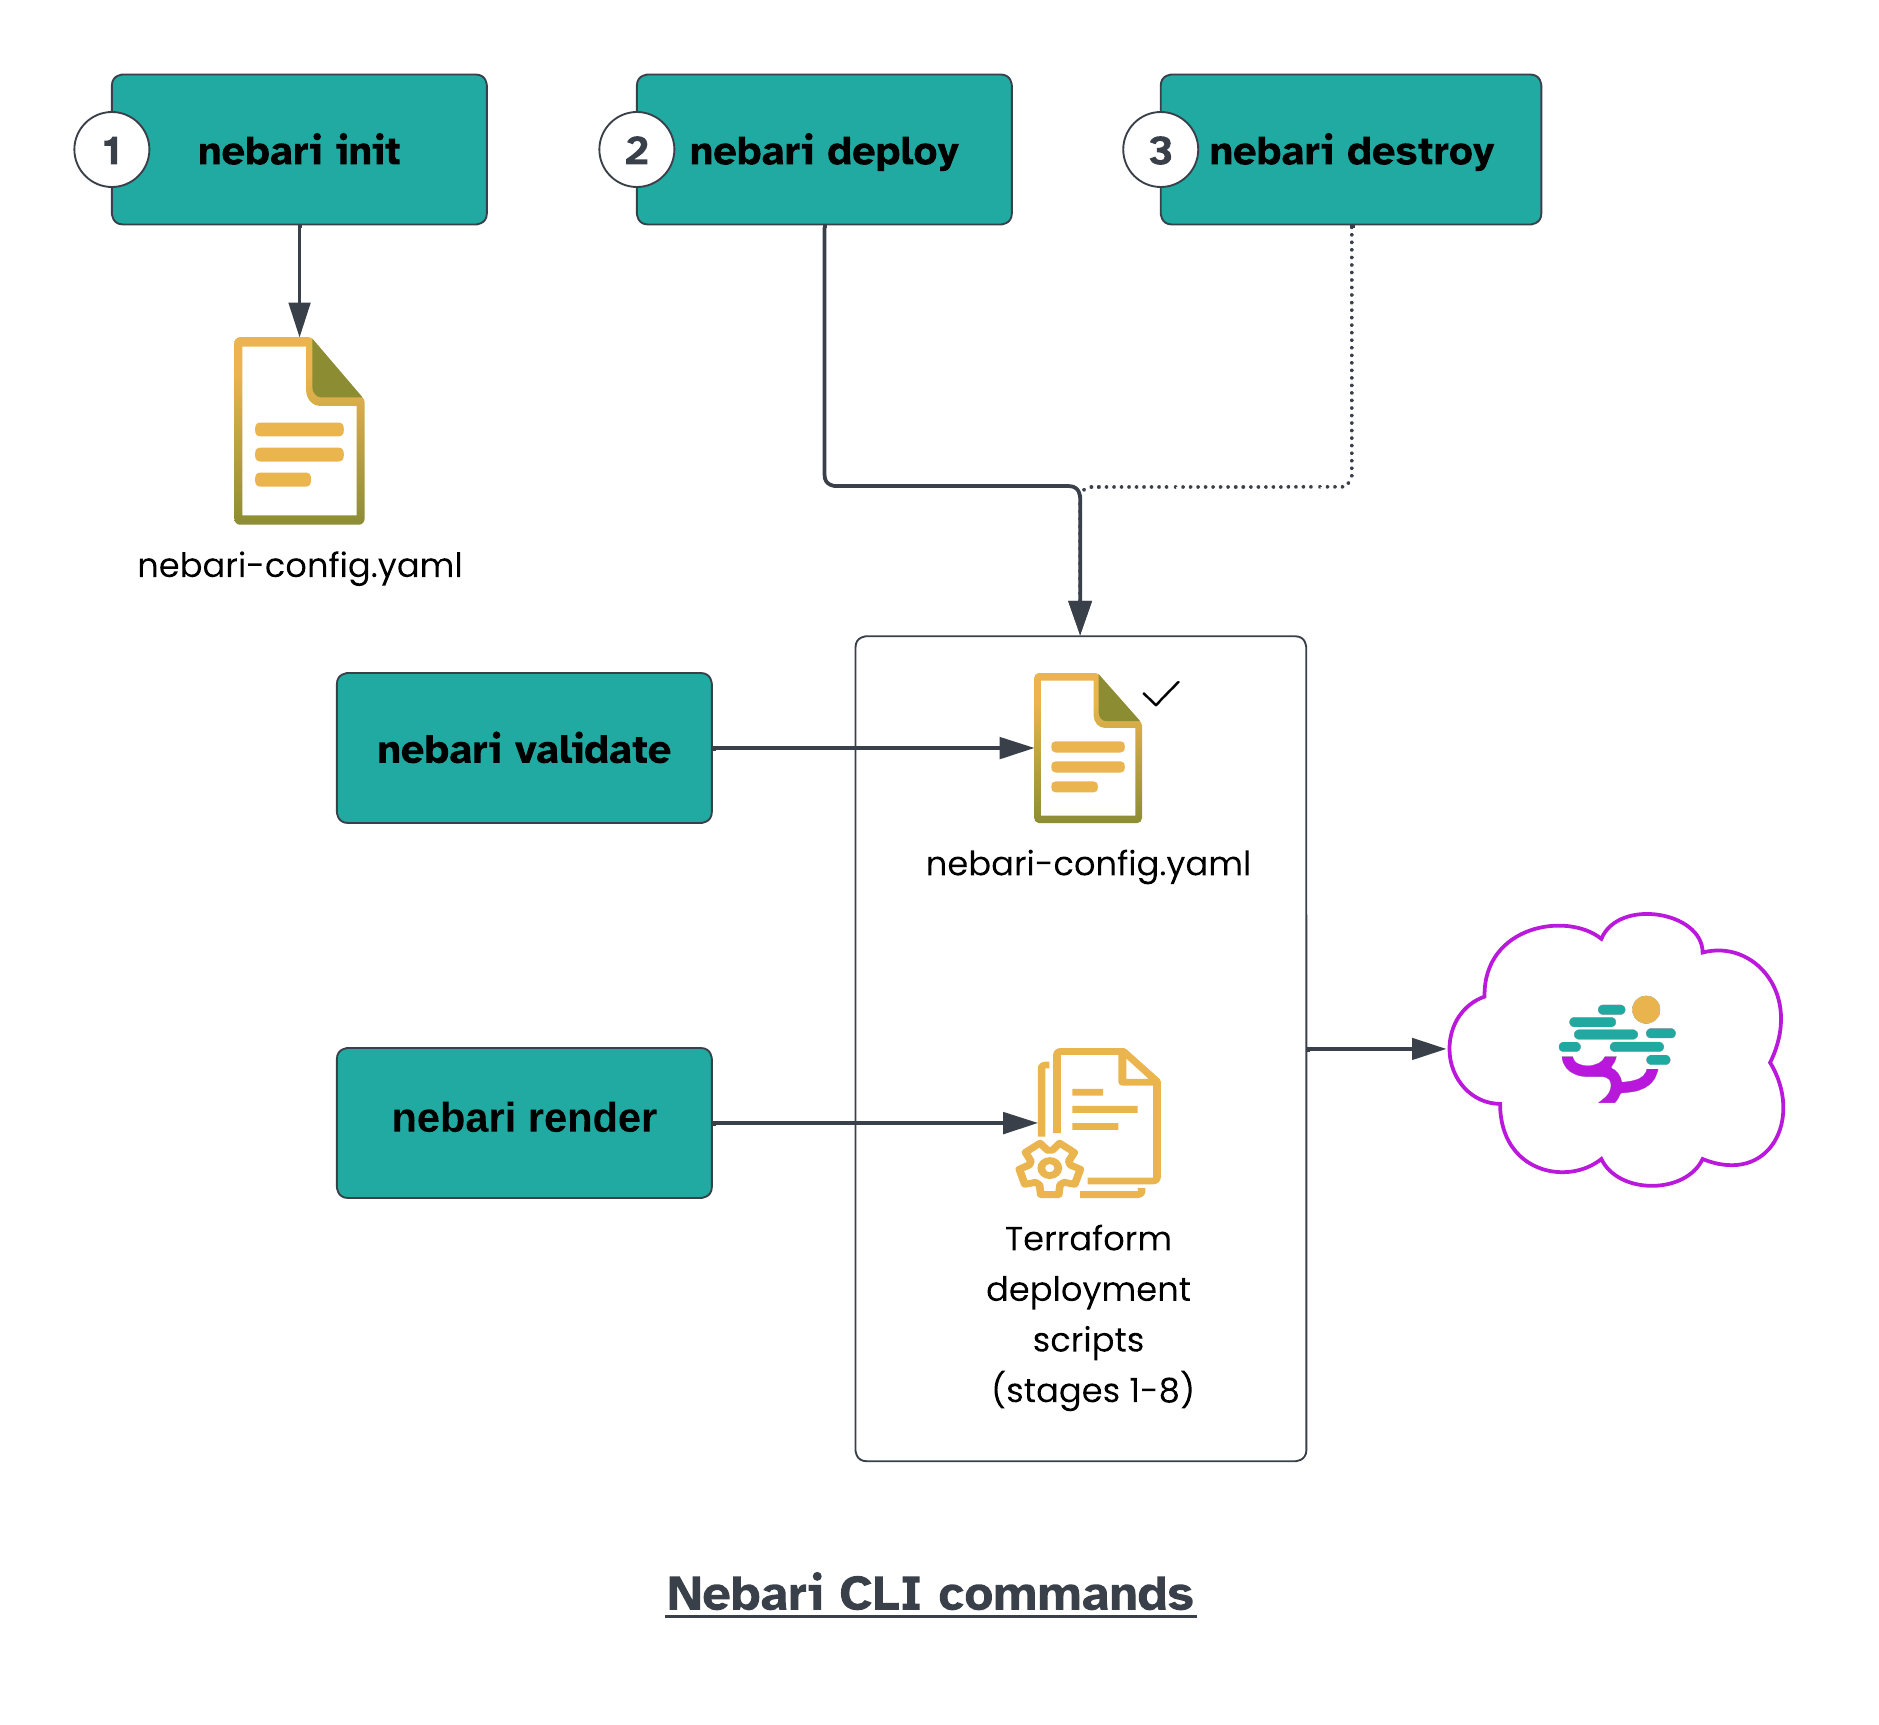 A diagram showing the different Nebari CLI commands. The first step is 'nebari init' which creates the 'nebari-config.yaml' file. The second step is 'nebari deploy' which deploys the Nebari instance on the cloud. The third step is 'nebari destroy' which destroys the deployed instance. These second and third steps run 'nebari validate' and 'nebari render' internally. 'nebari validate' verifies the 'nebari-config.yaml' file. 'nebari render' generates the 8-stage terraform deployment scripts.